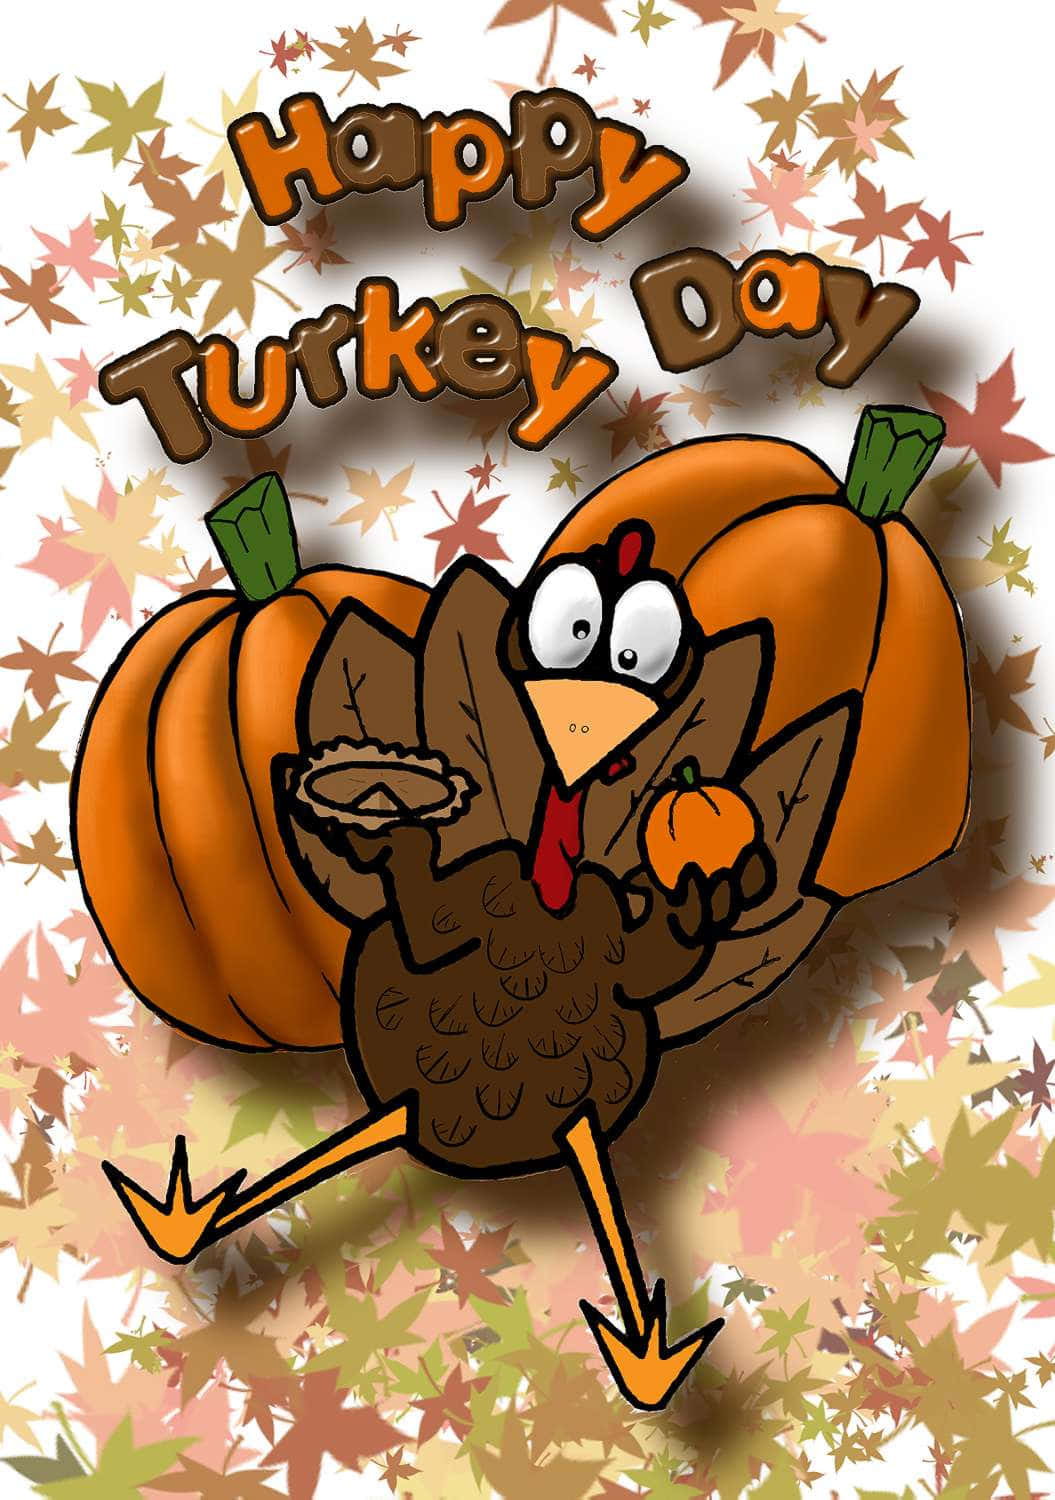 It's that time of year again! Time to feast with friends and family and enjoy a few Thanksgiving funny moments!